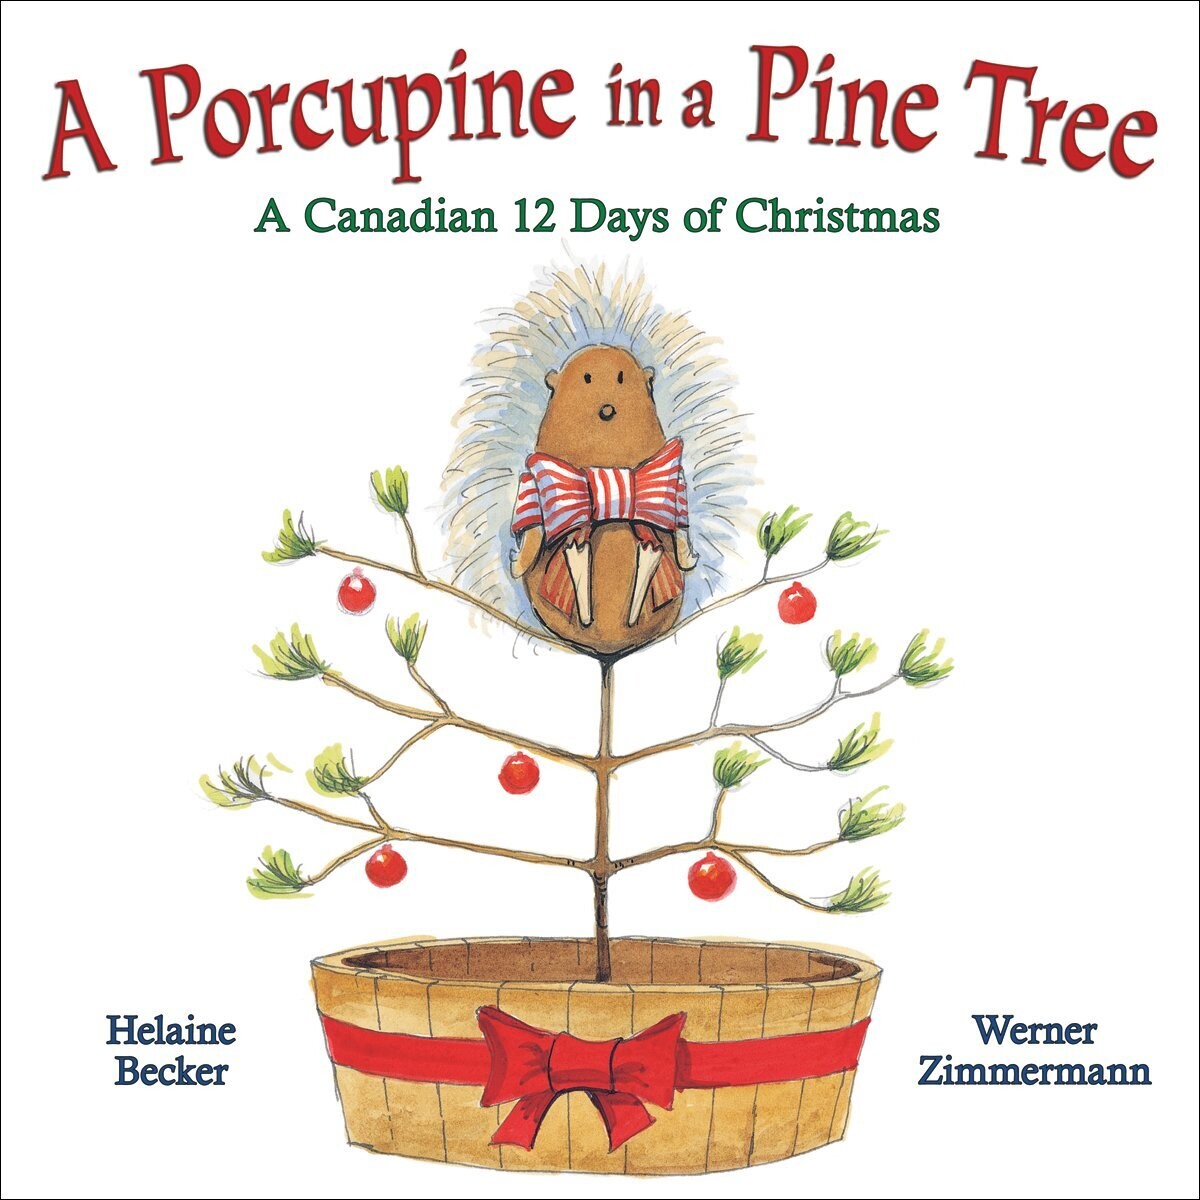 A Porcupine in a Pine Tree: Canadian 12 Days of Christmas - Helaine Becker - Hardcover